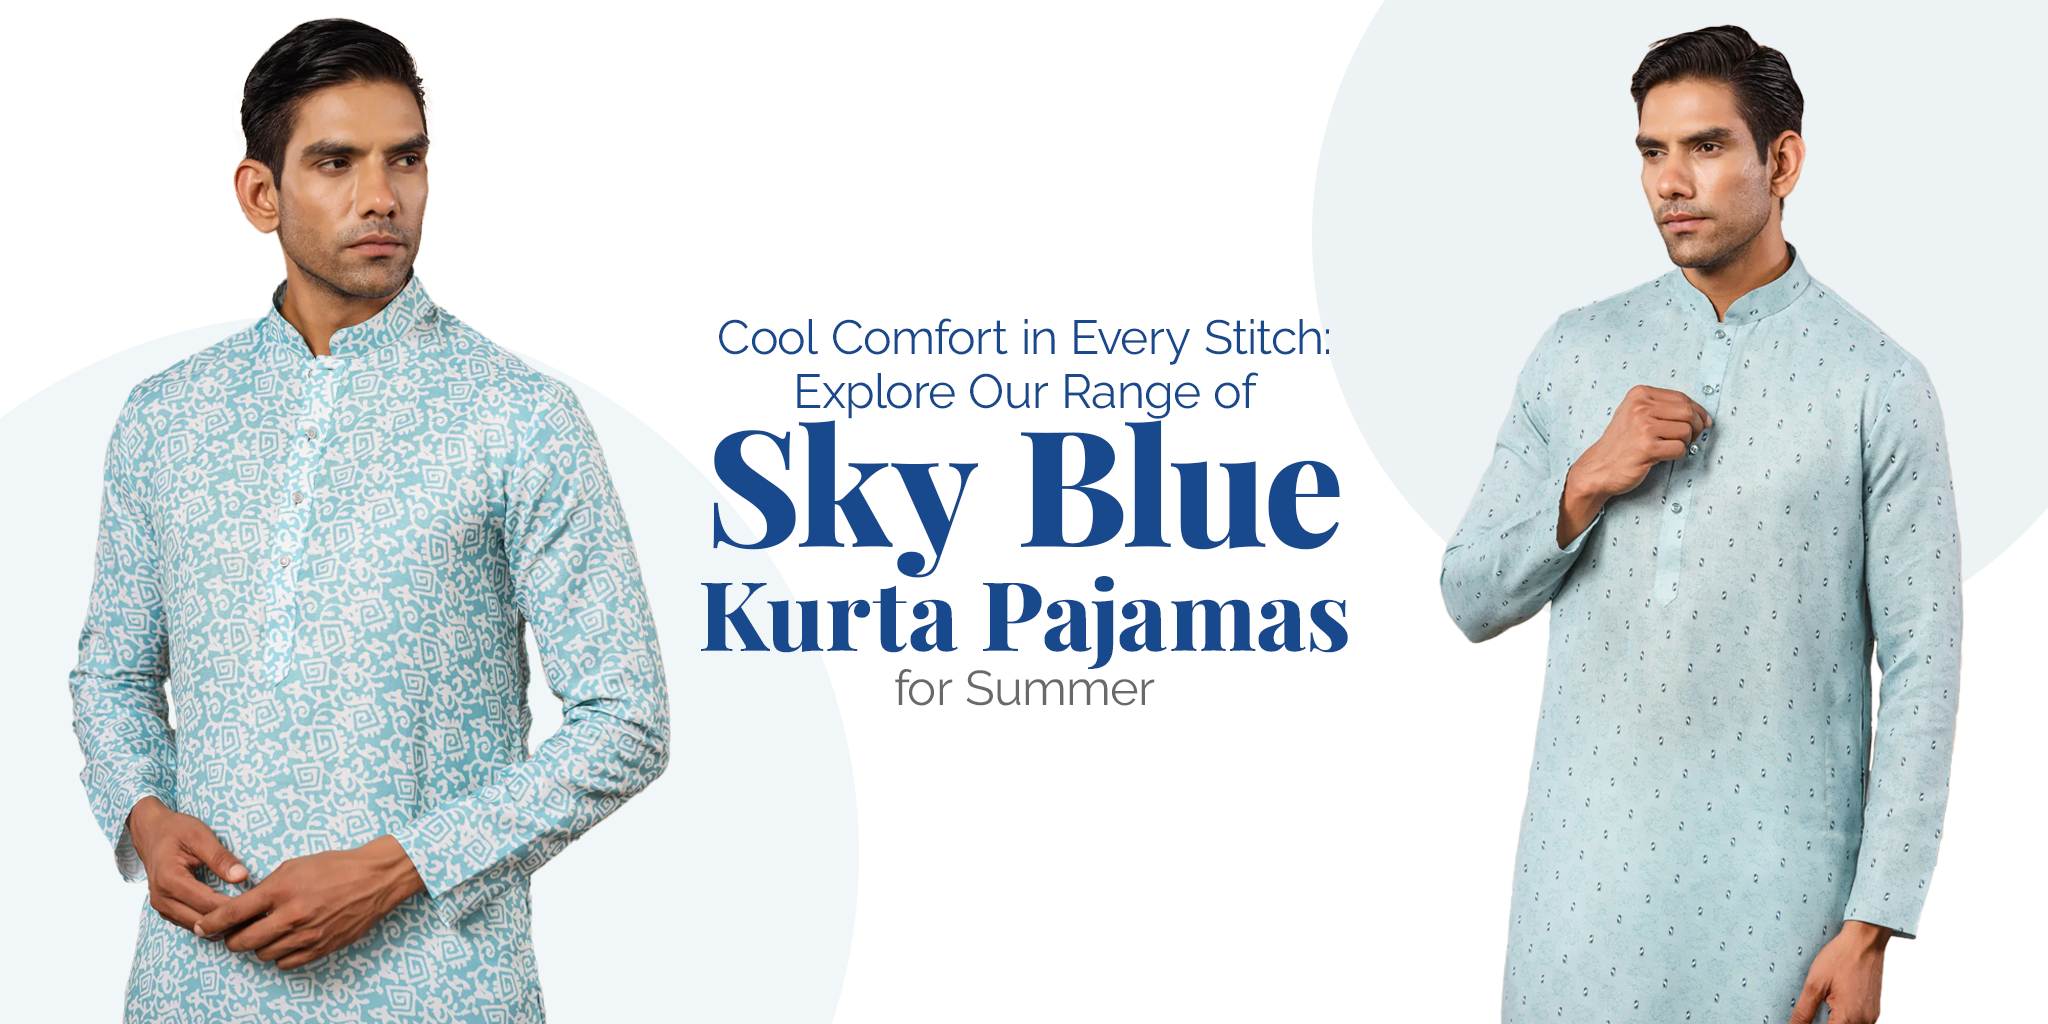 Cool Comfort in Every Stitch: Explore Our Range of Sky Blue Kurta Pajamas for Summer